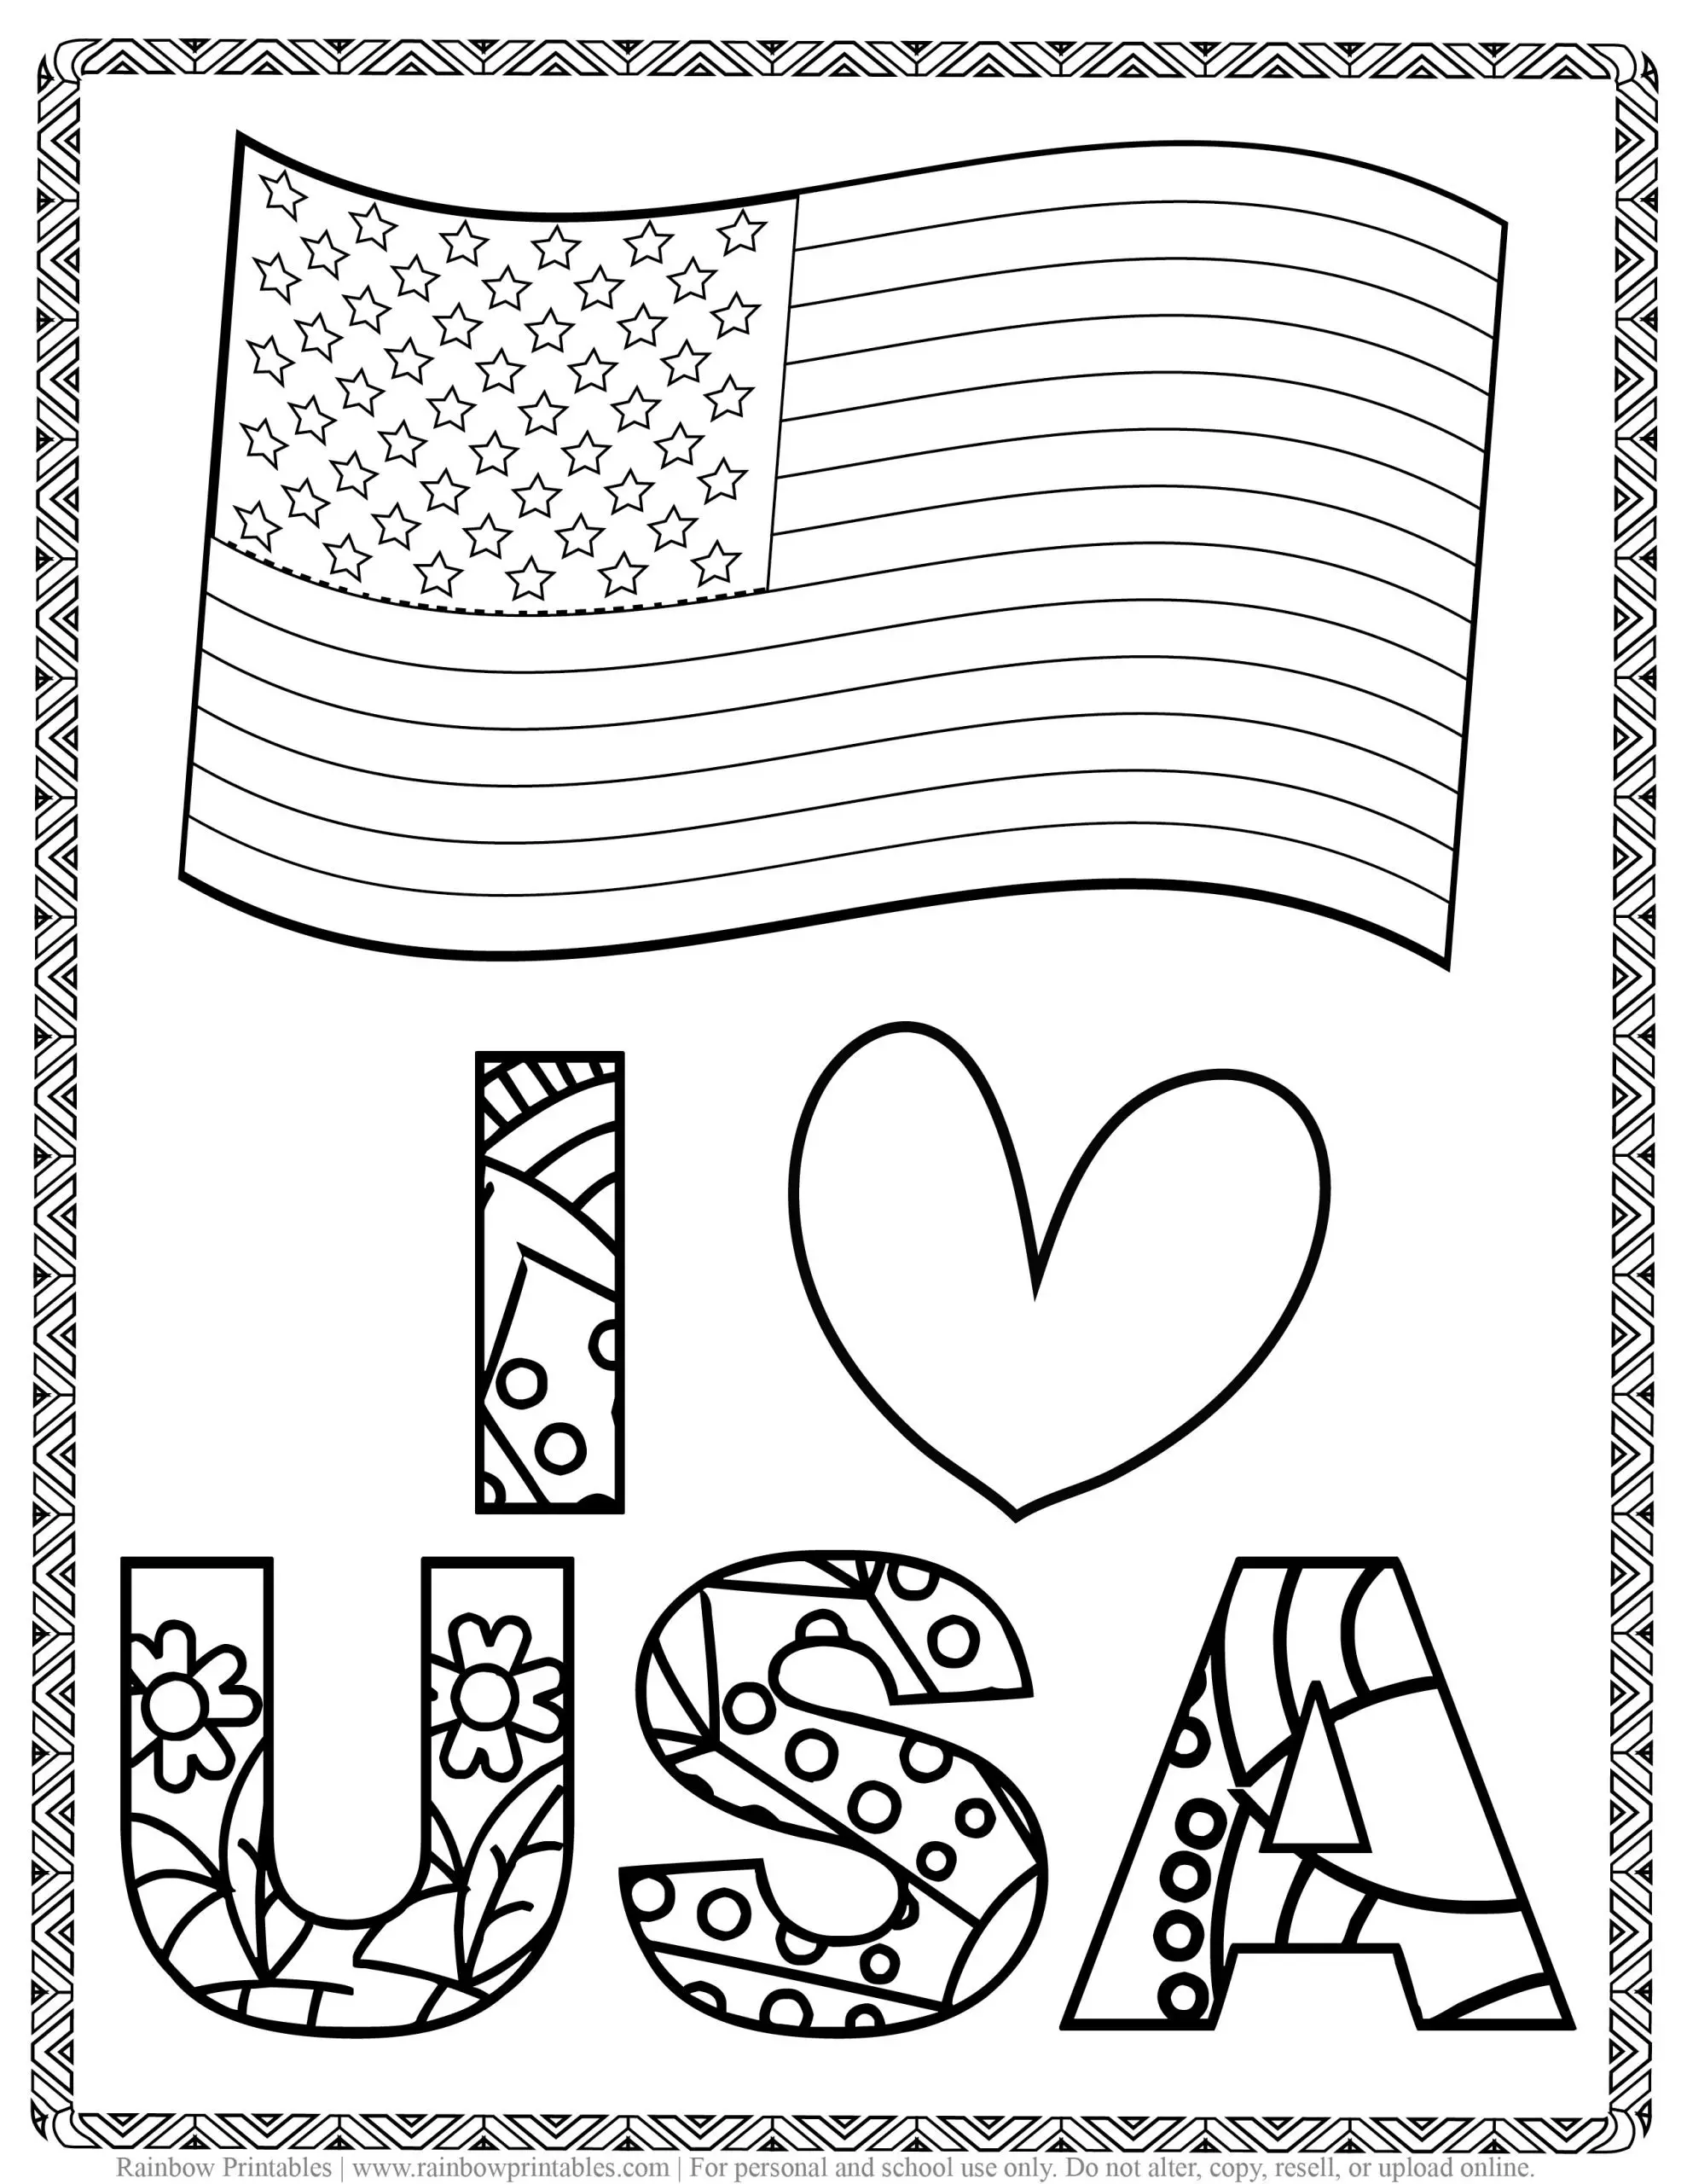 I HEART USA + flag Kids Patriotic July 4th Independence Day Printables for Children, Toddlers, America Coloring Pages, Activity for Preschool, Freedom